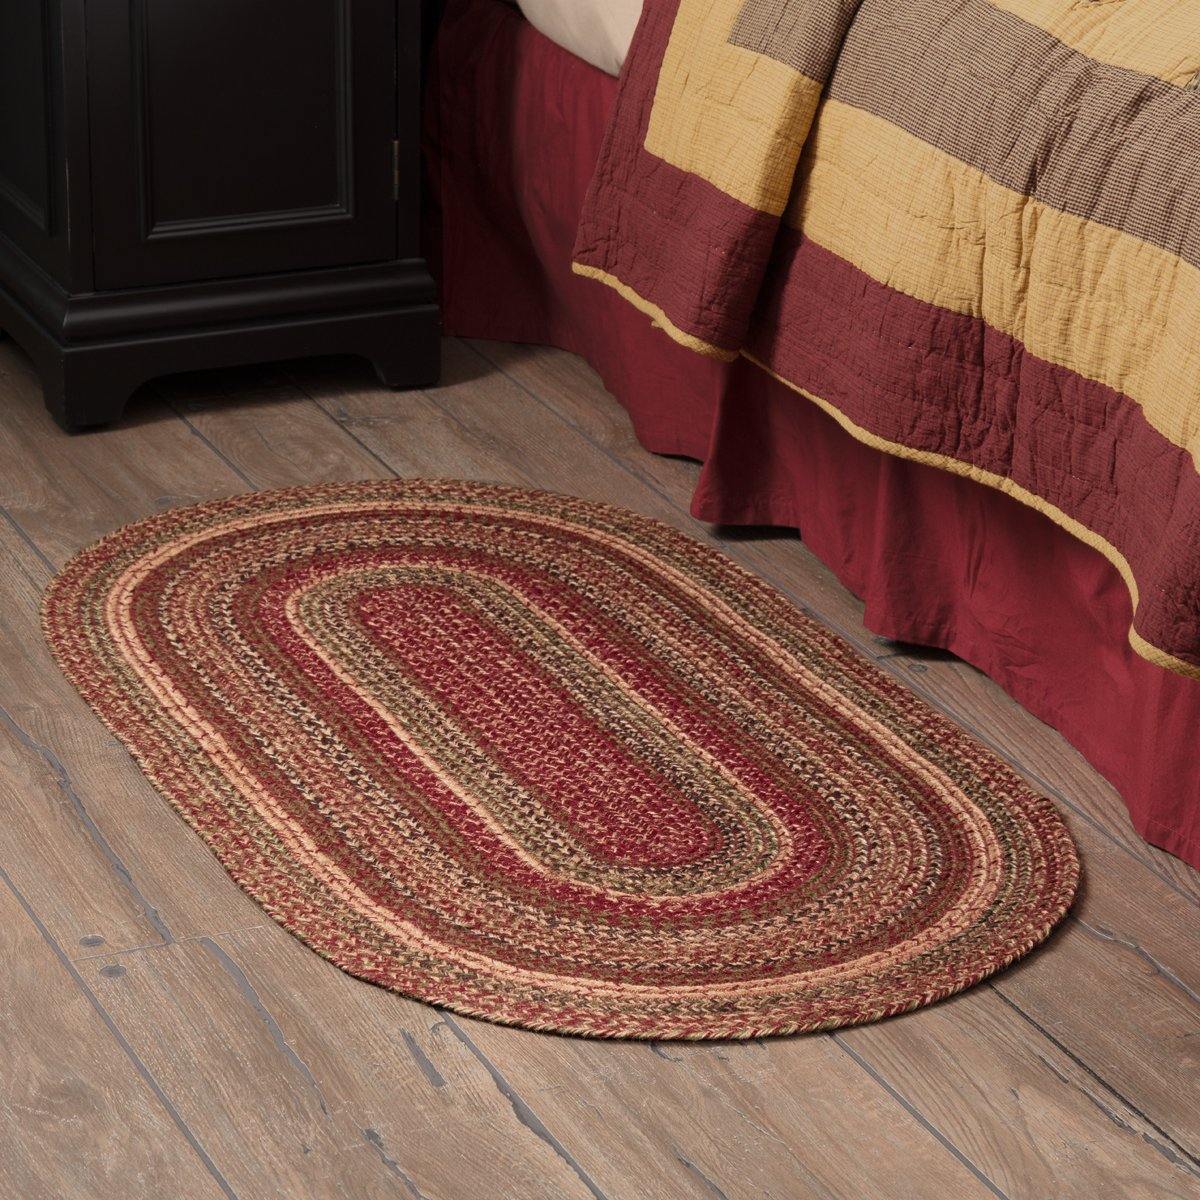 Cider Mill Jute Braided Rug Oval 27"x48" with Rug Pad VHC Brands - The Fox Decor